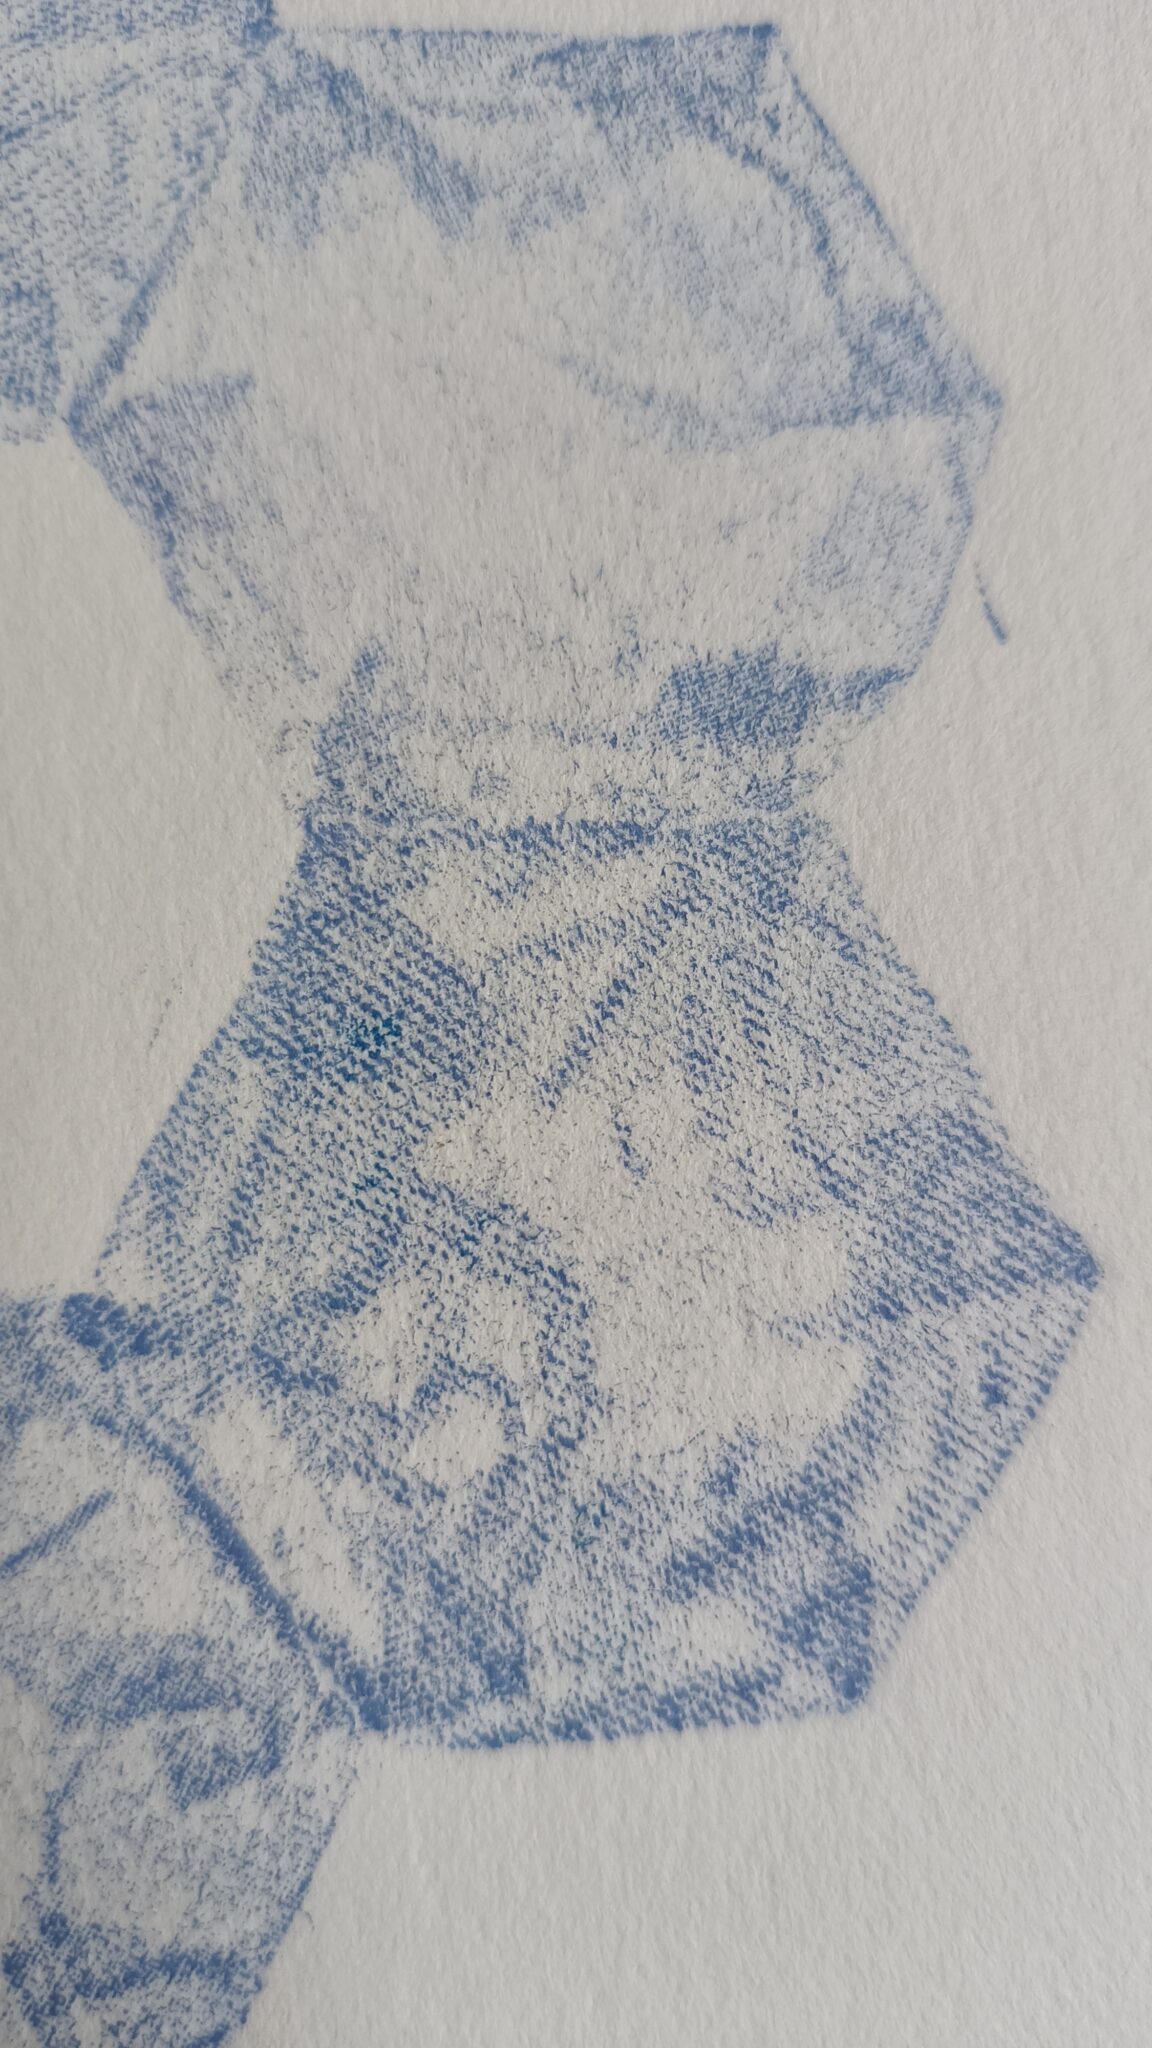 close-up showing texture printed from fabric onto paper, blue